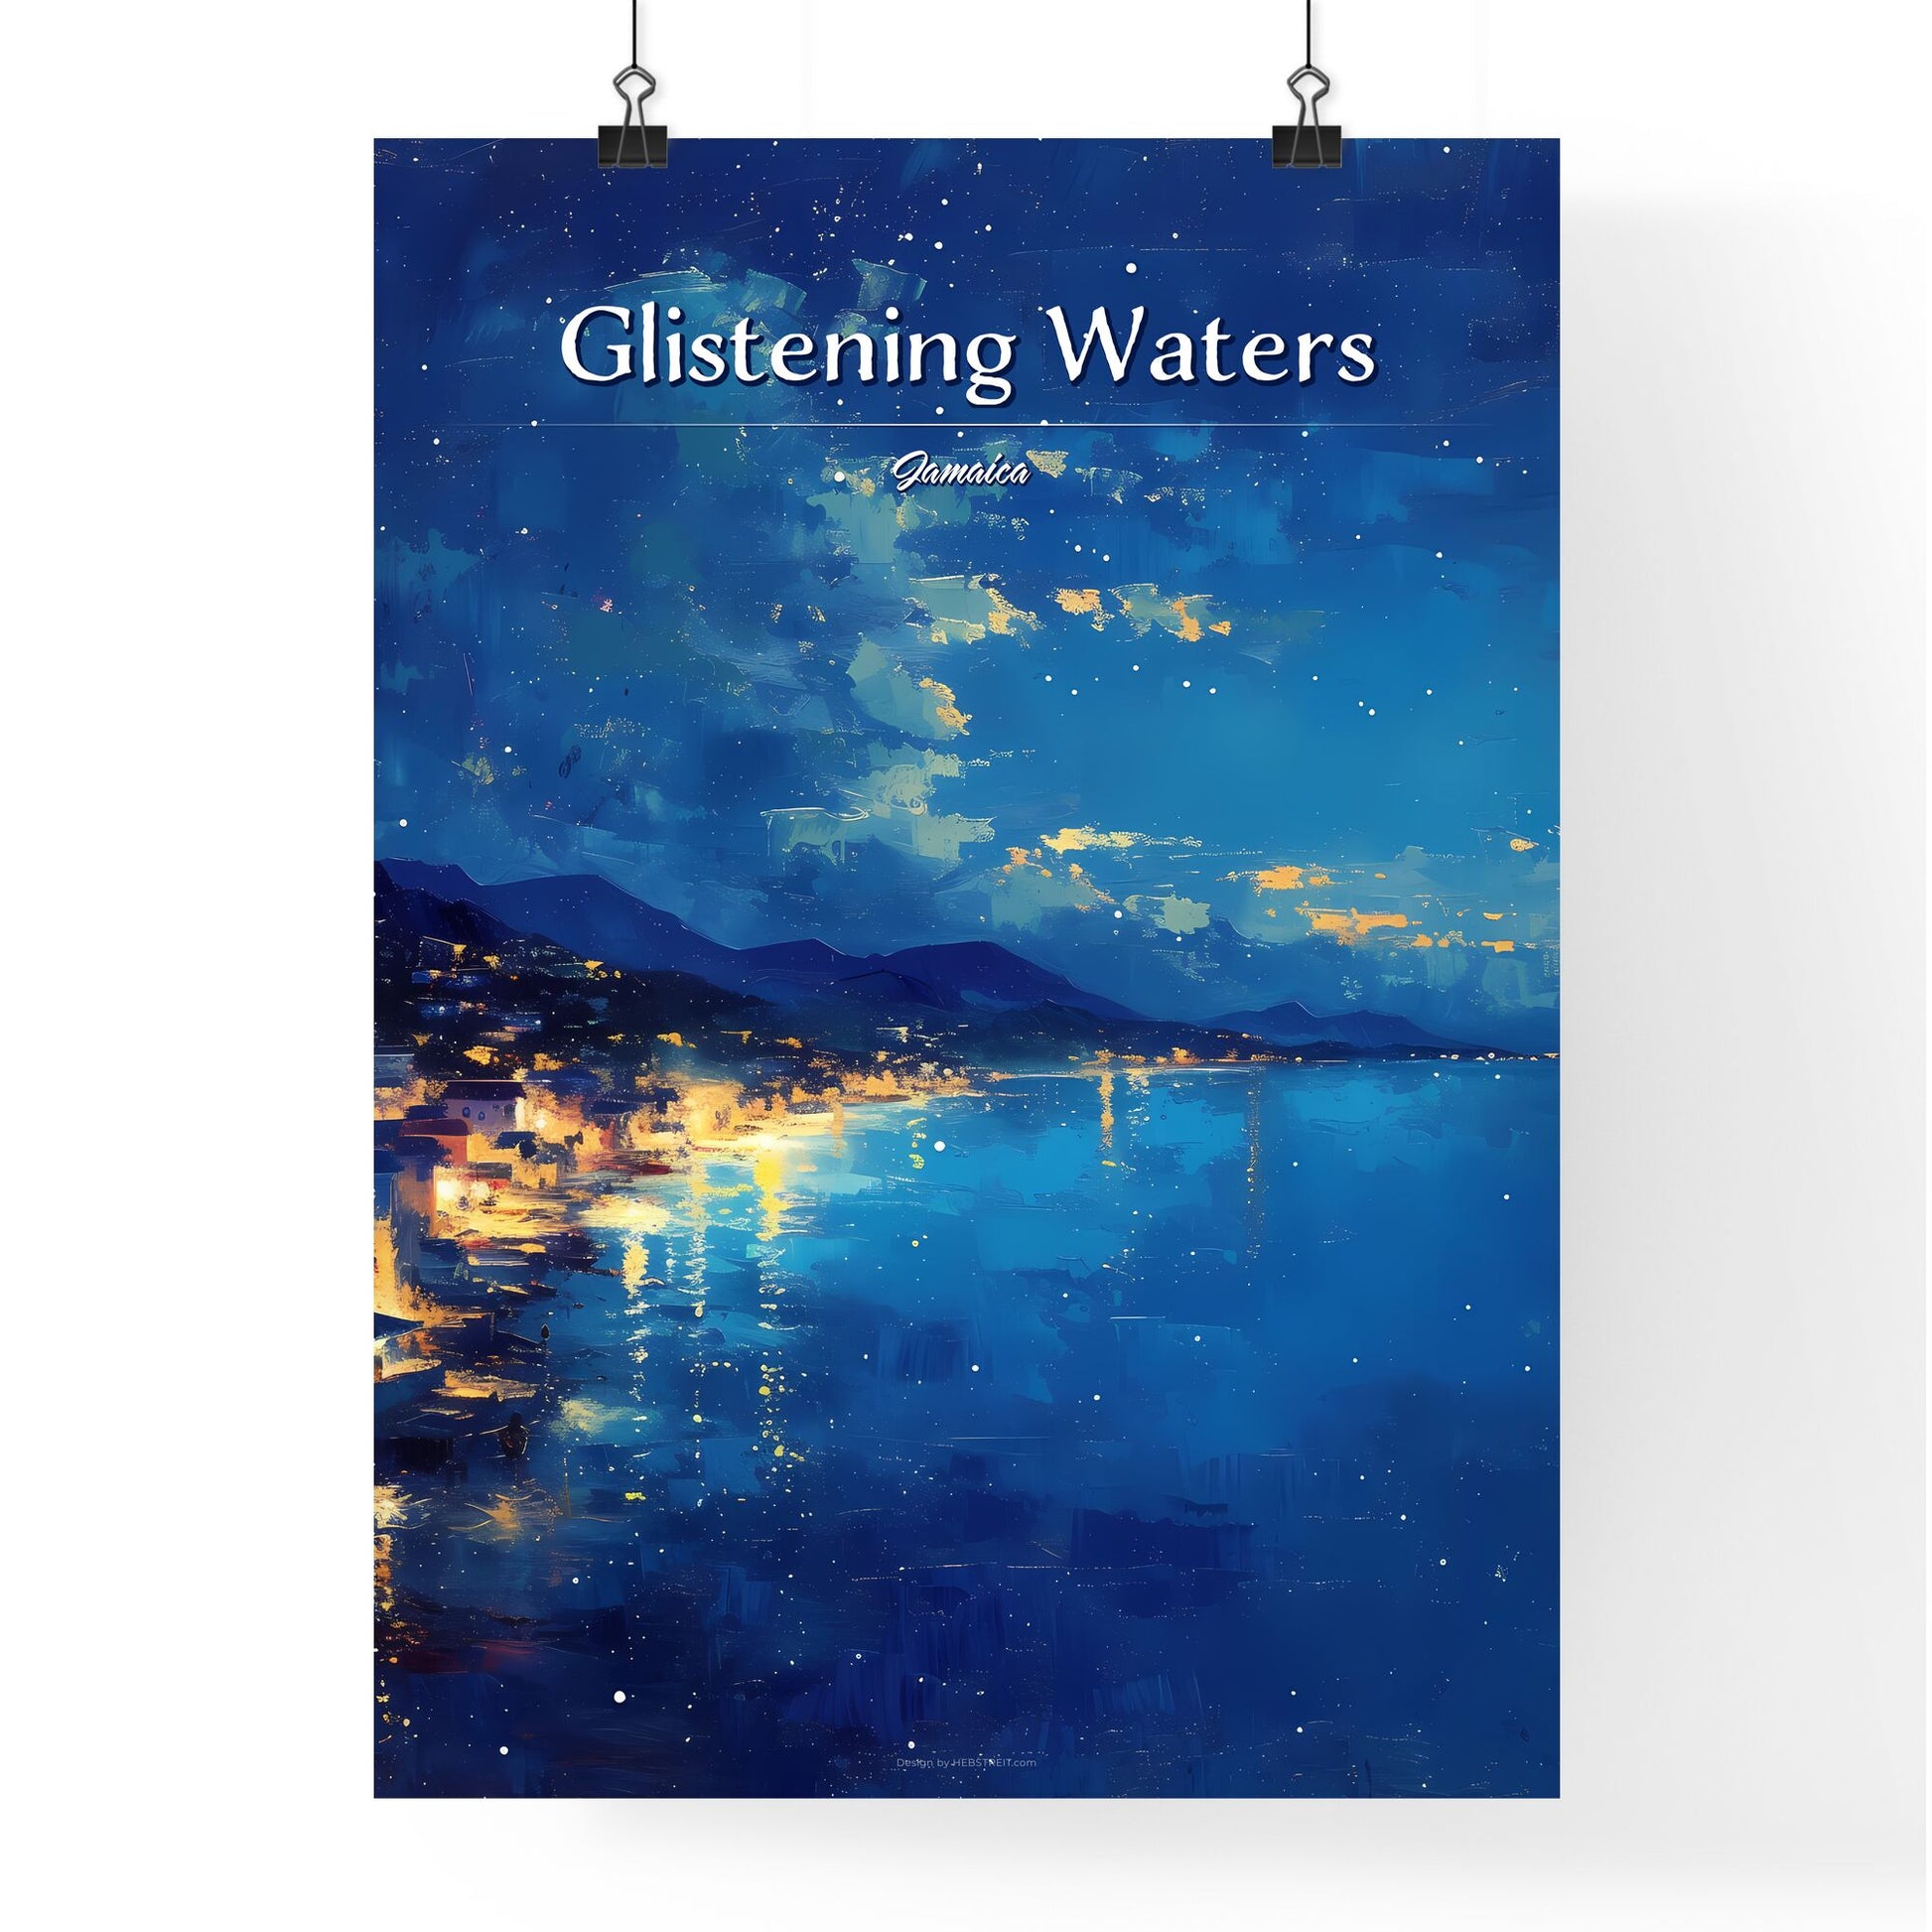 Glistening Waters Luminous Lagoon, Jamaica - Art print of a city on the water Default Title